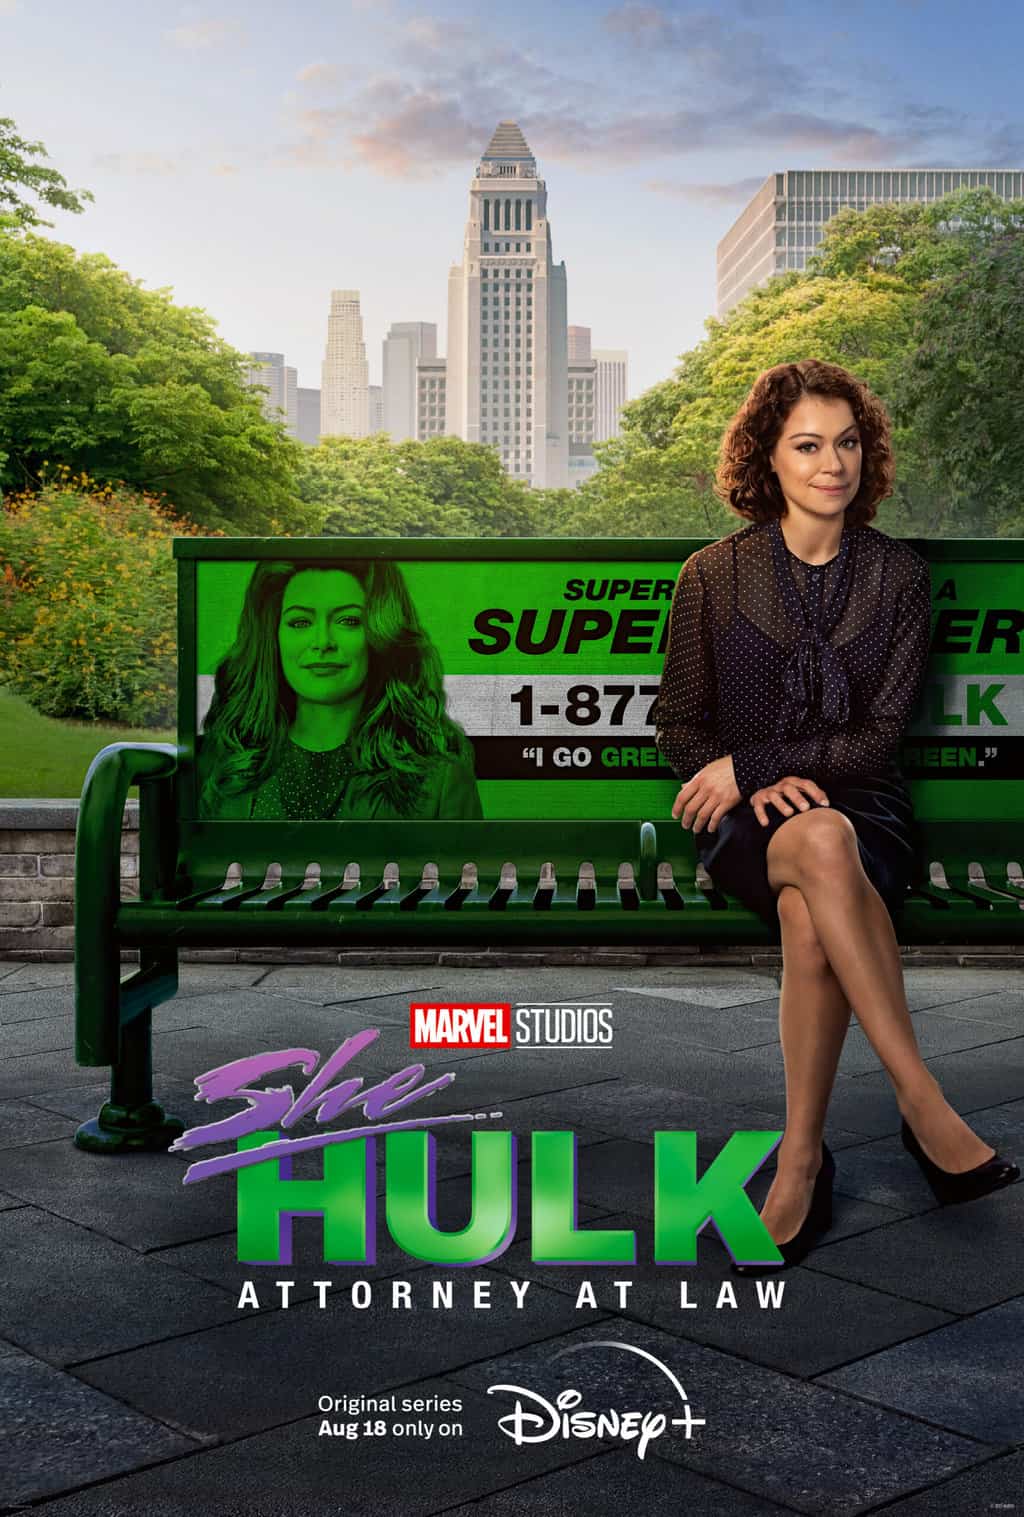 shehulk age rating and parents guide. Movie poster woman sitting on bench in a park. 